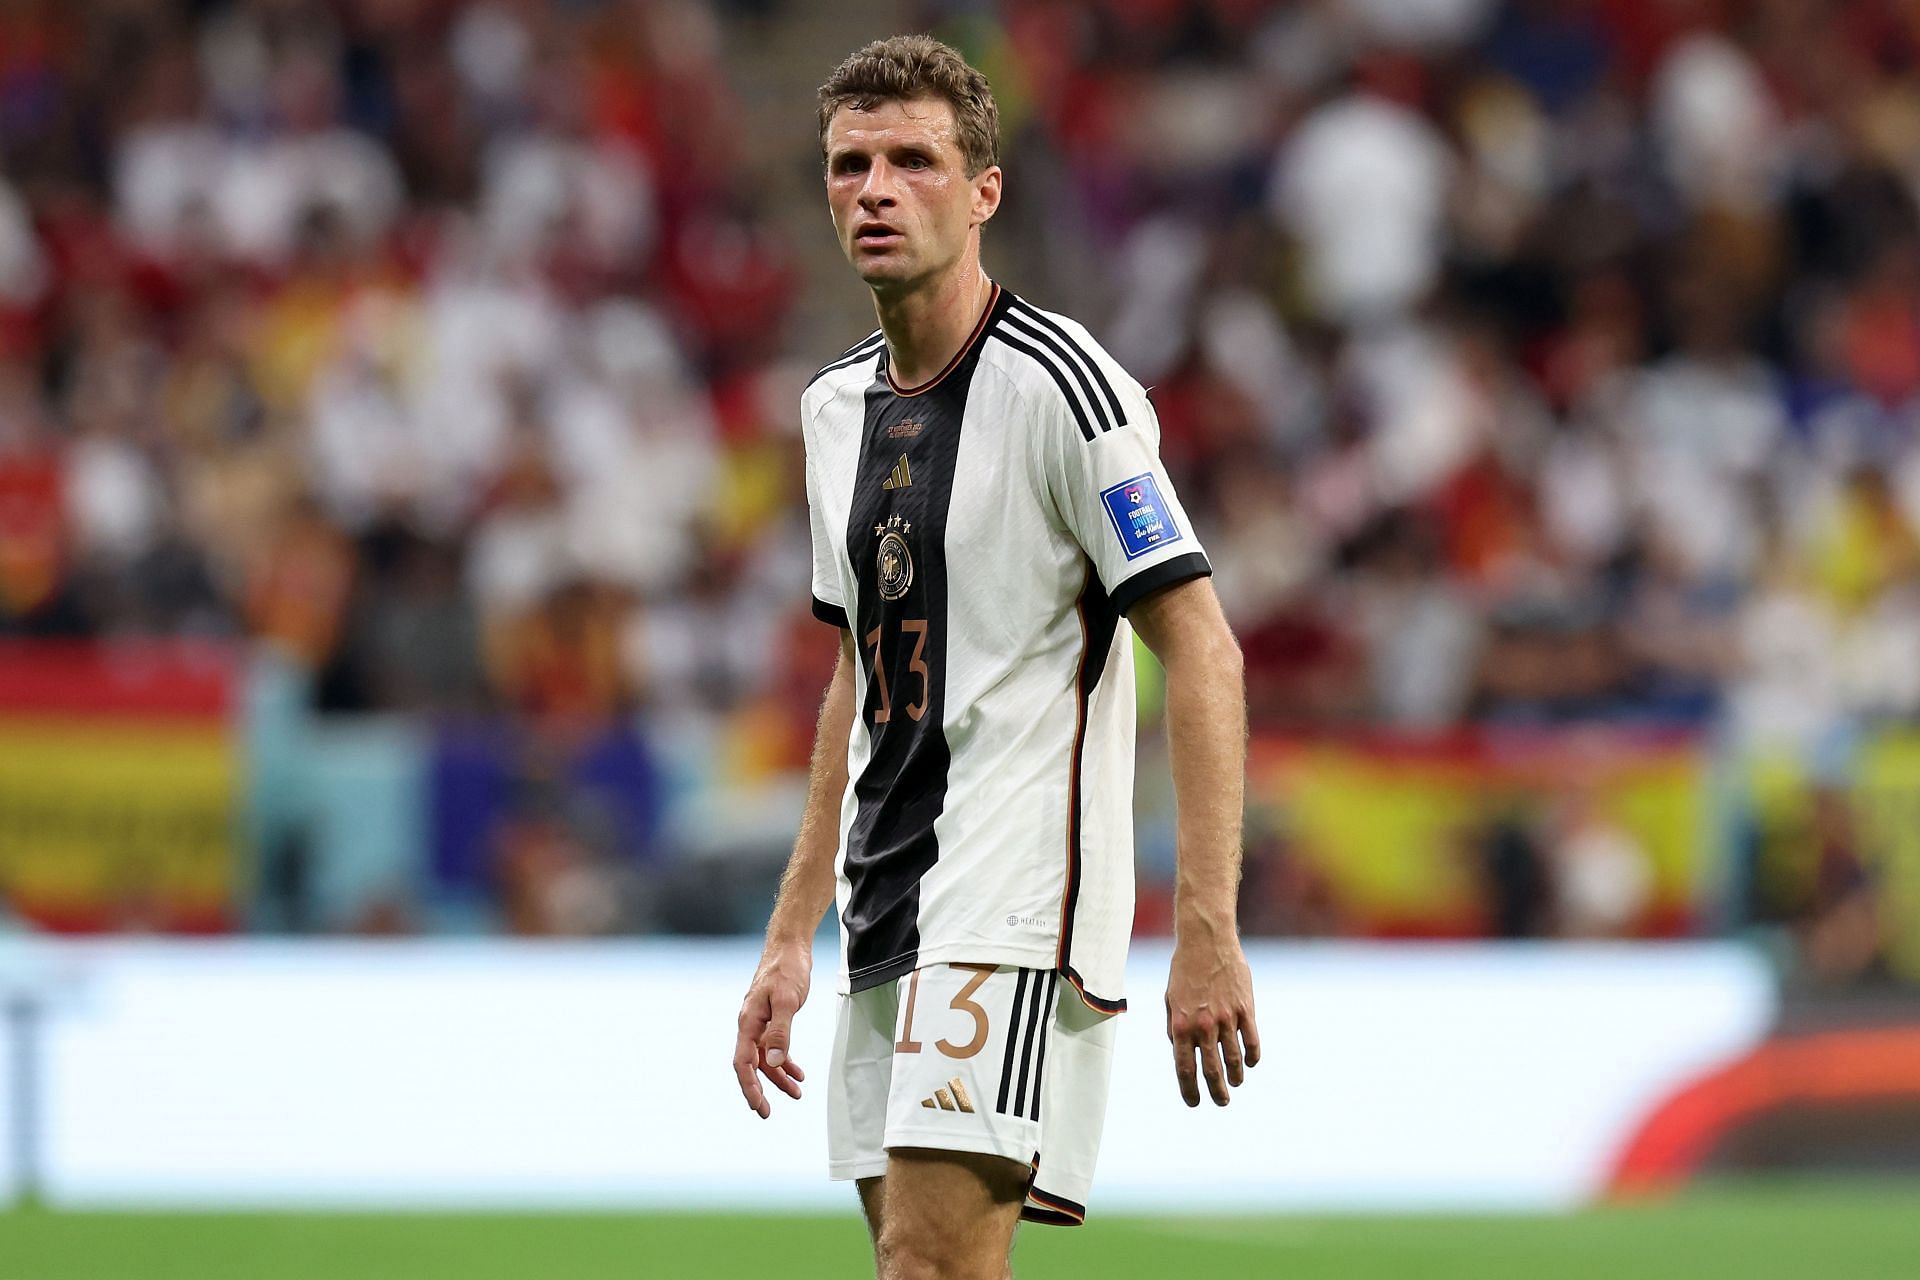 Muller played 70 minutes for Germany against Spain in Group E